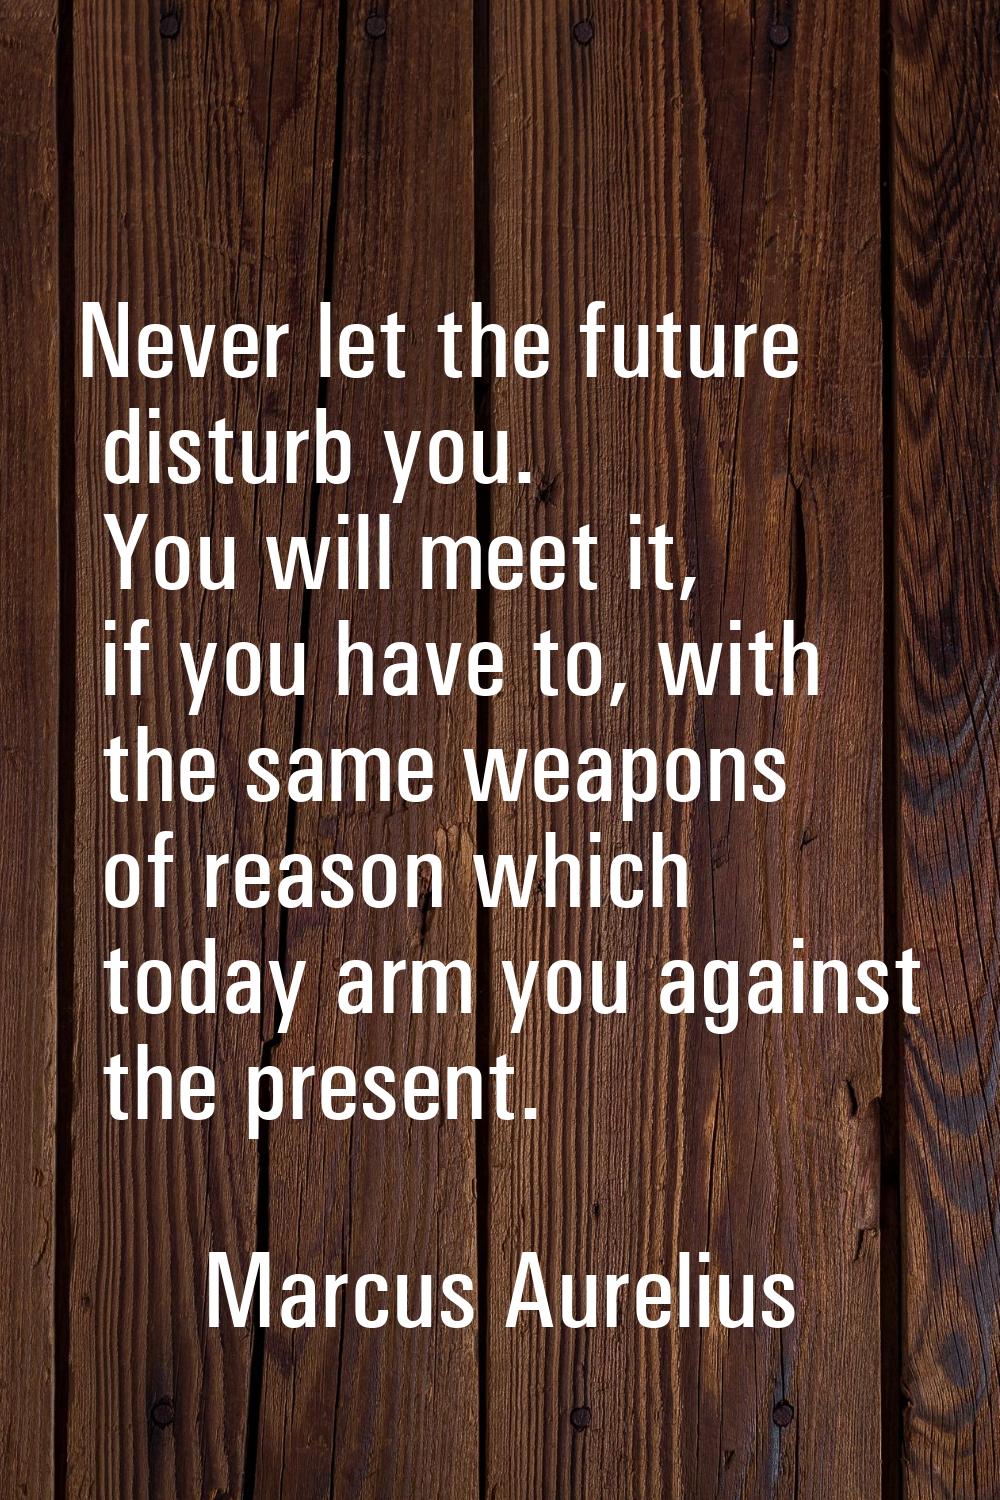 Never let the future disturb you. You will meet it, if you have to, with the same weapons of reason